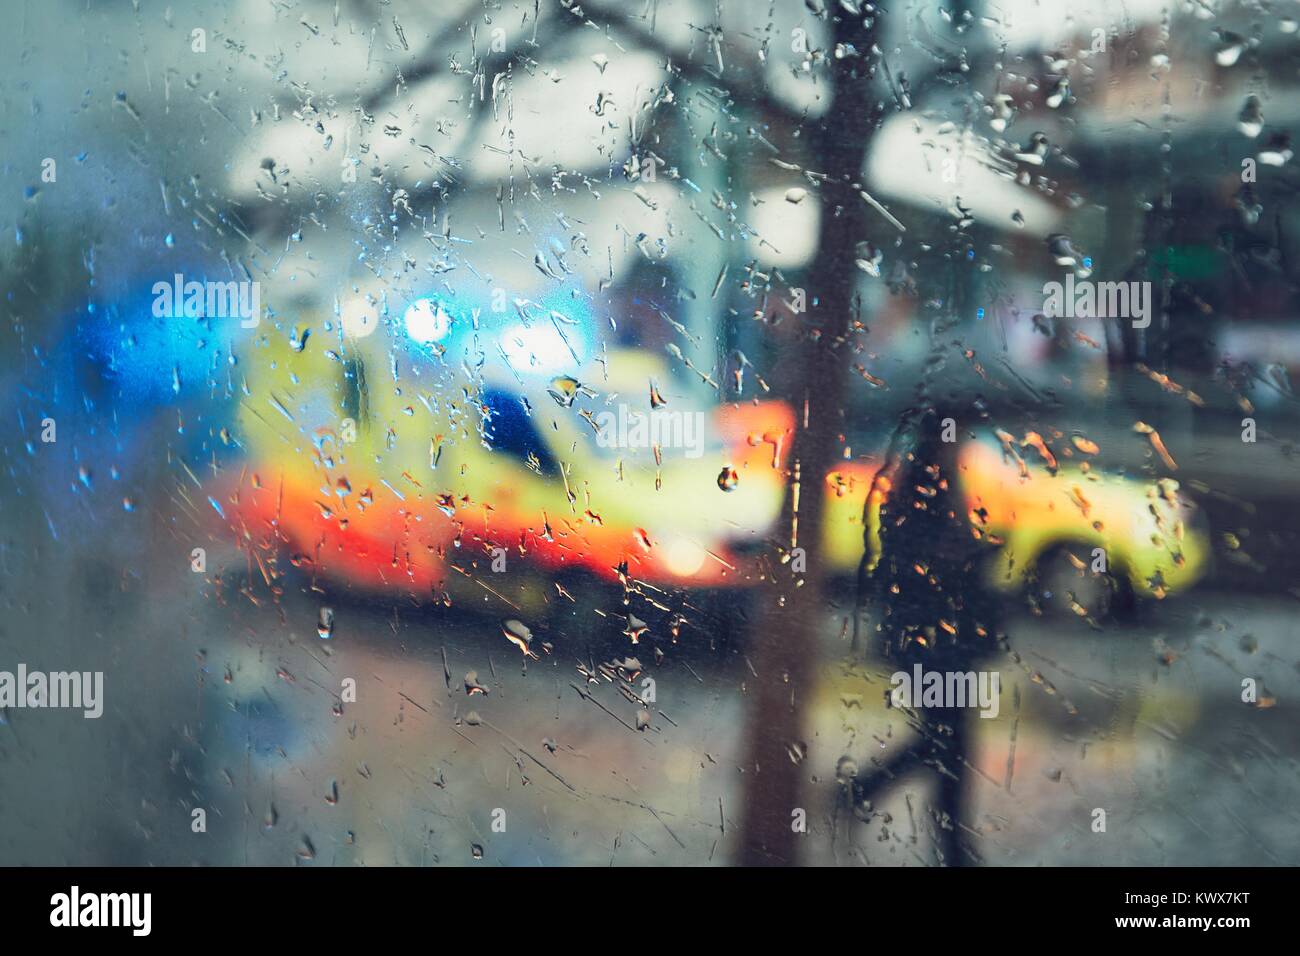 Emergency medical service response in the city. Ambulance cars on the rush street during rain. View through a car window and selective focus on the ra Stock Photo